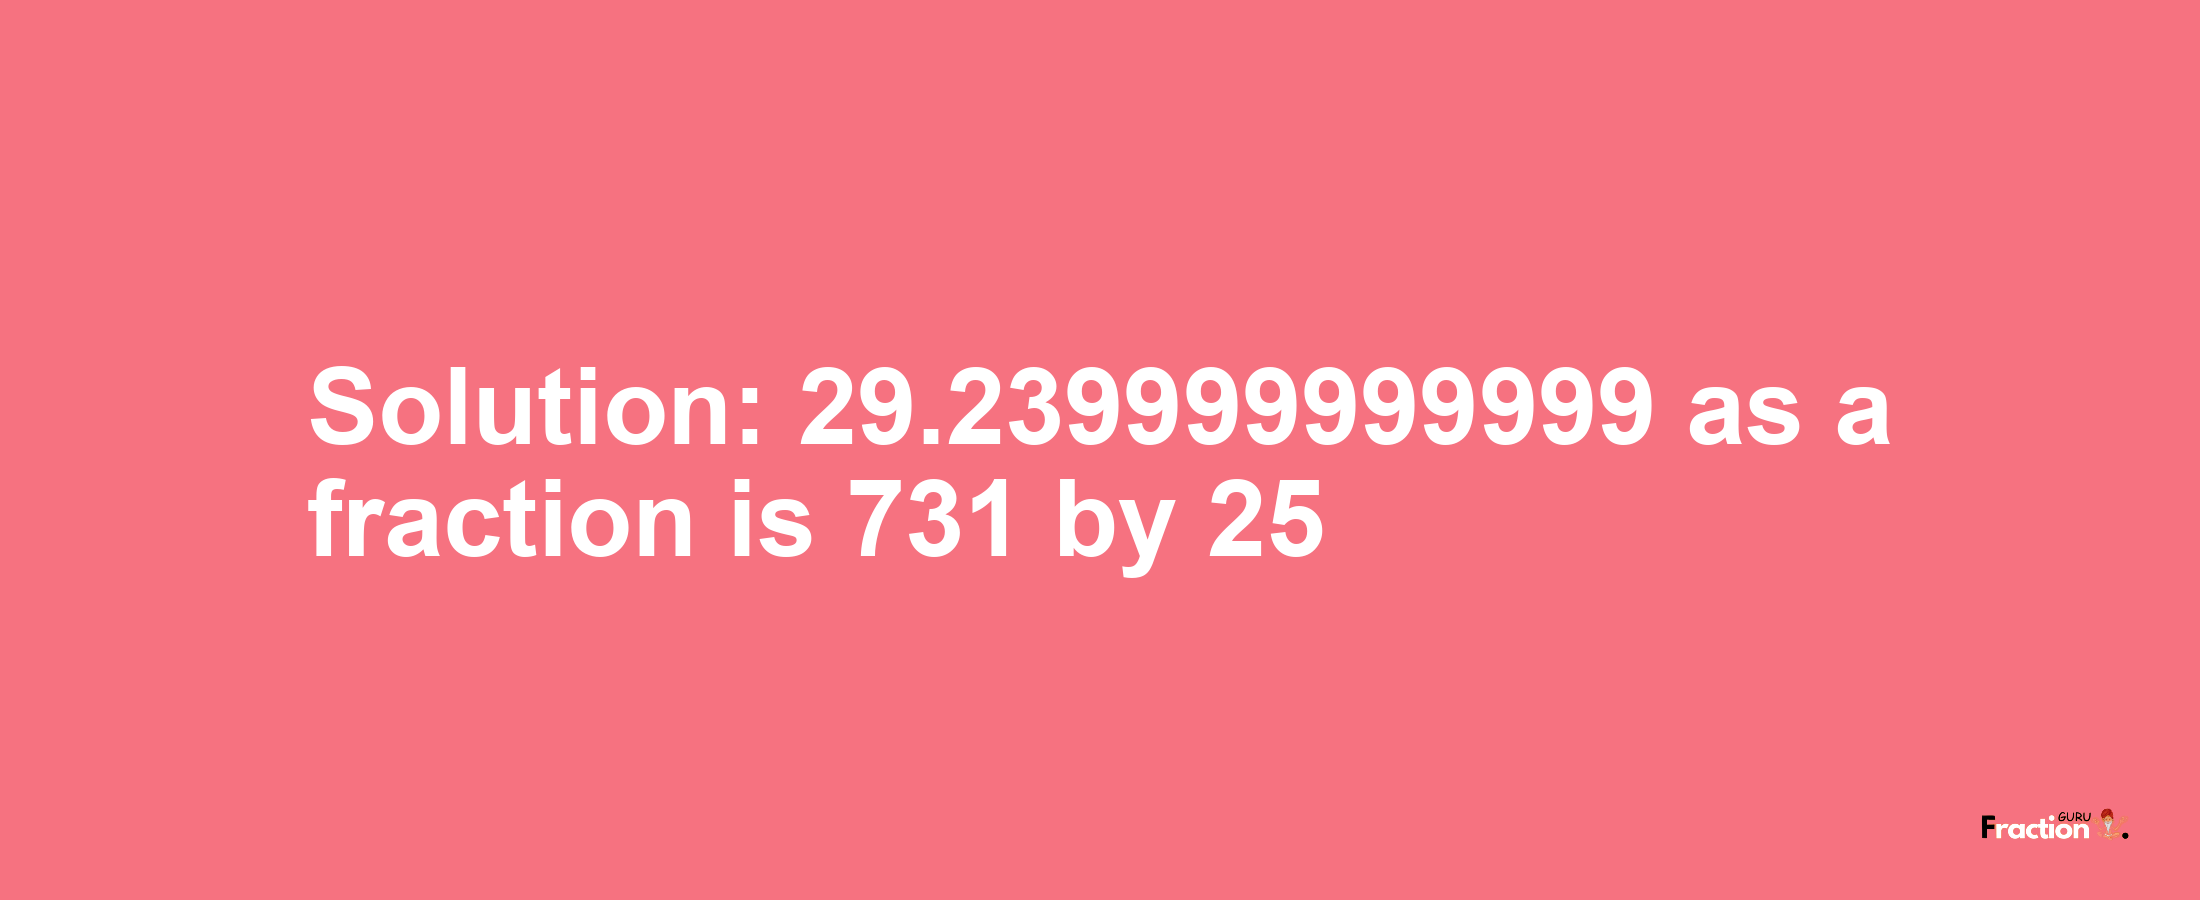 Solution:29.239999999999 as a fraction is 731/25